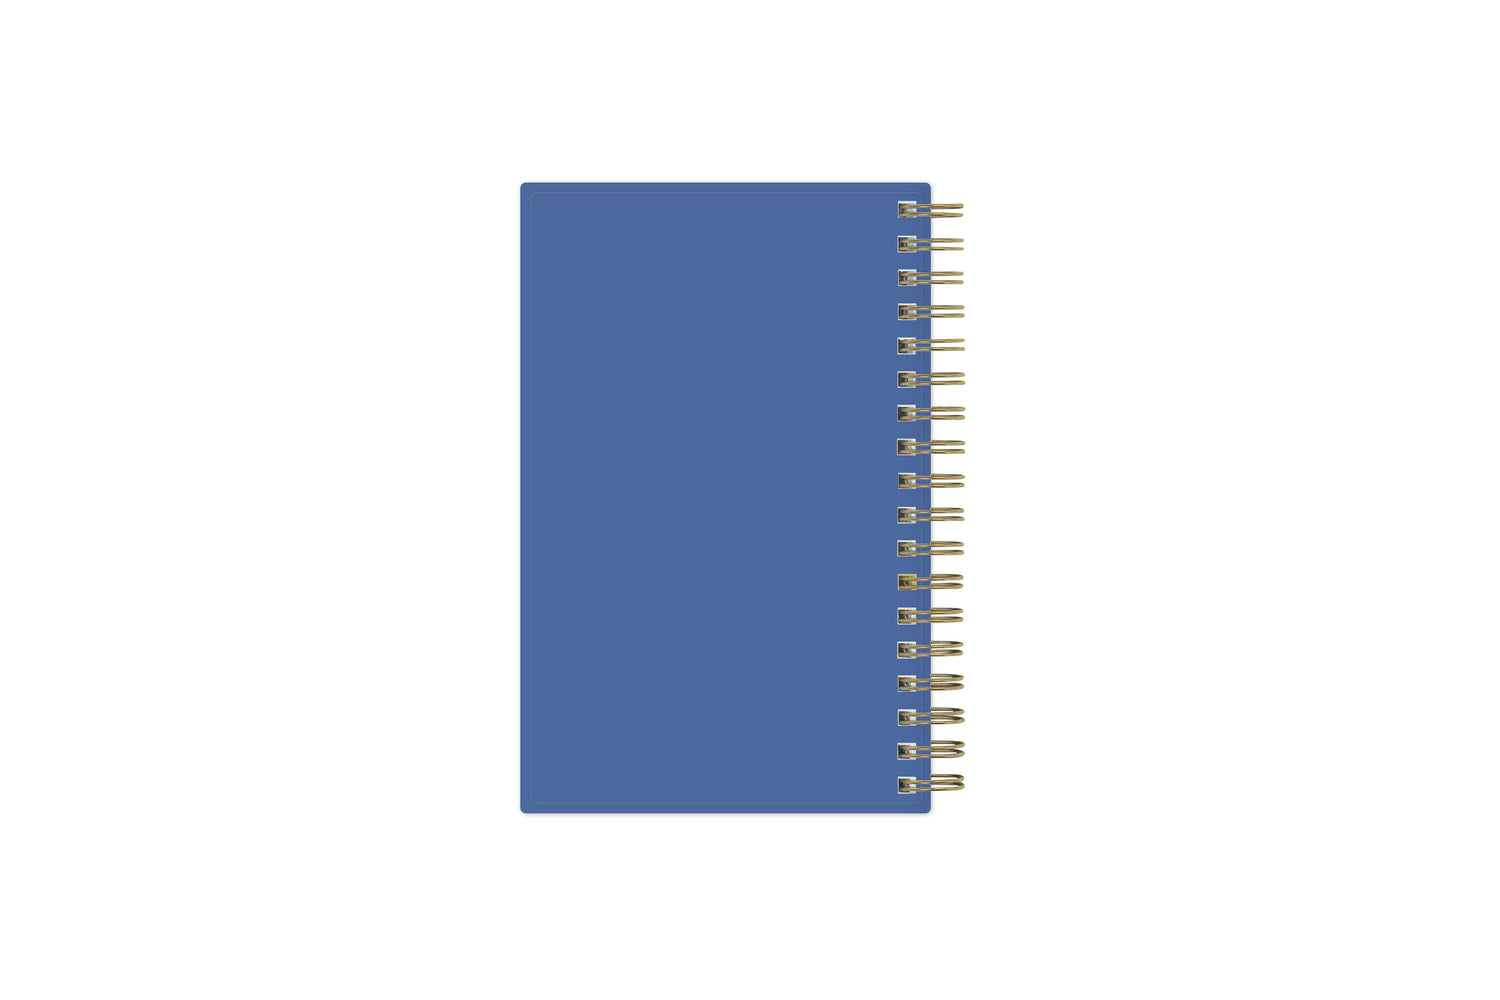 solid blue back cover in pocket sized planner 3.625x6.125